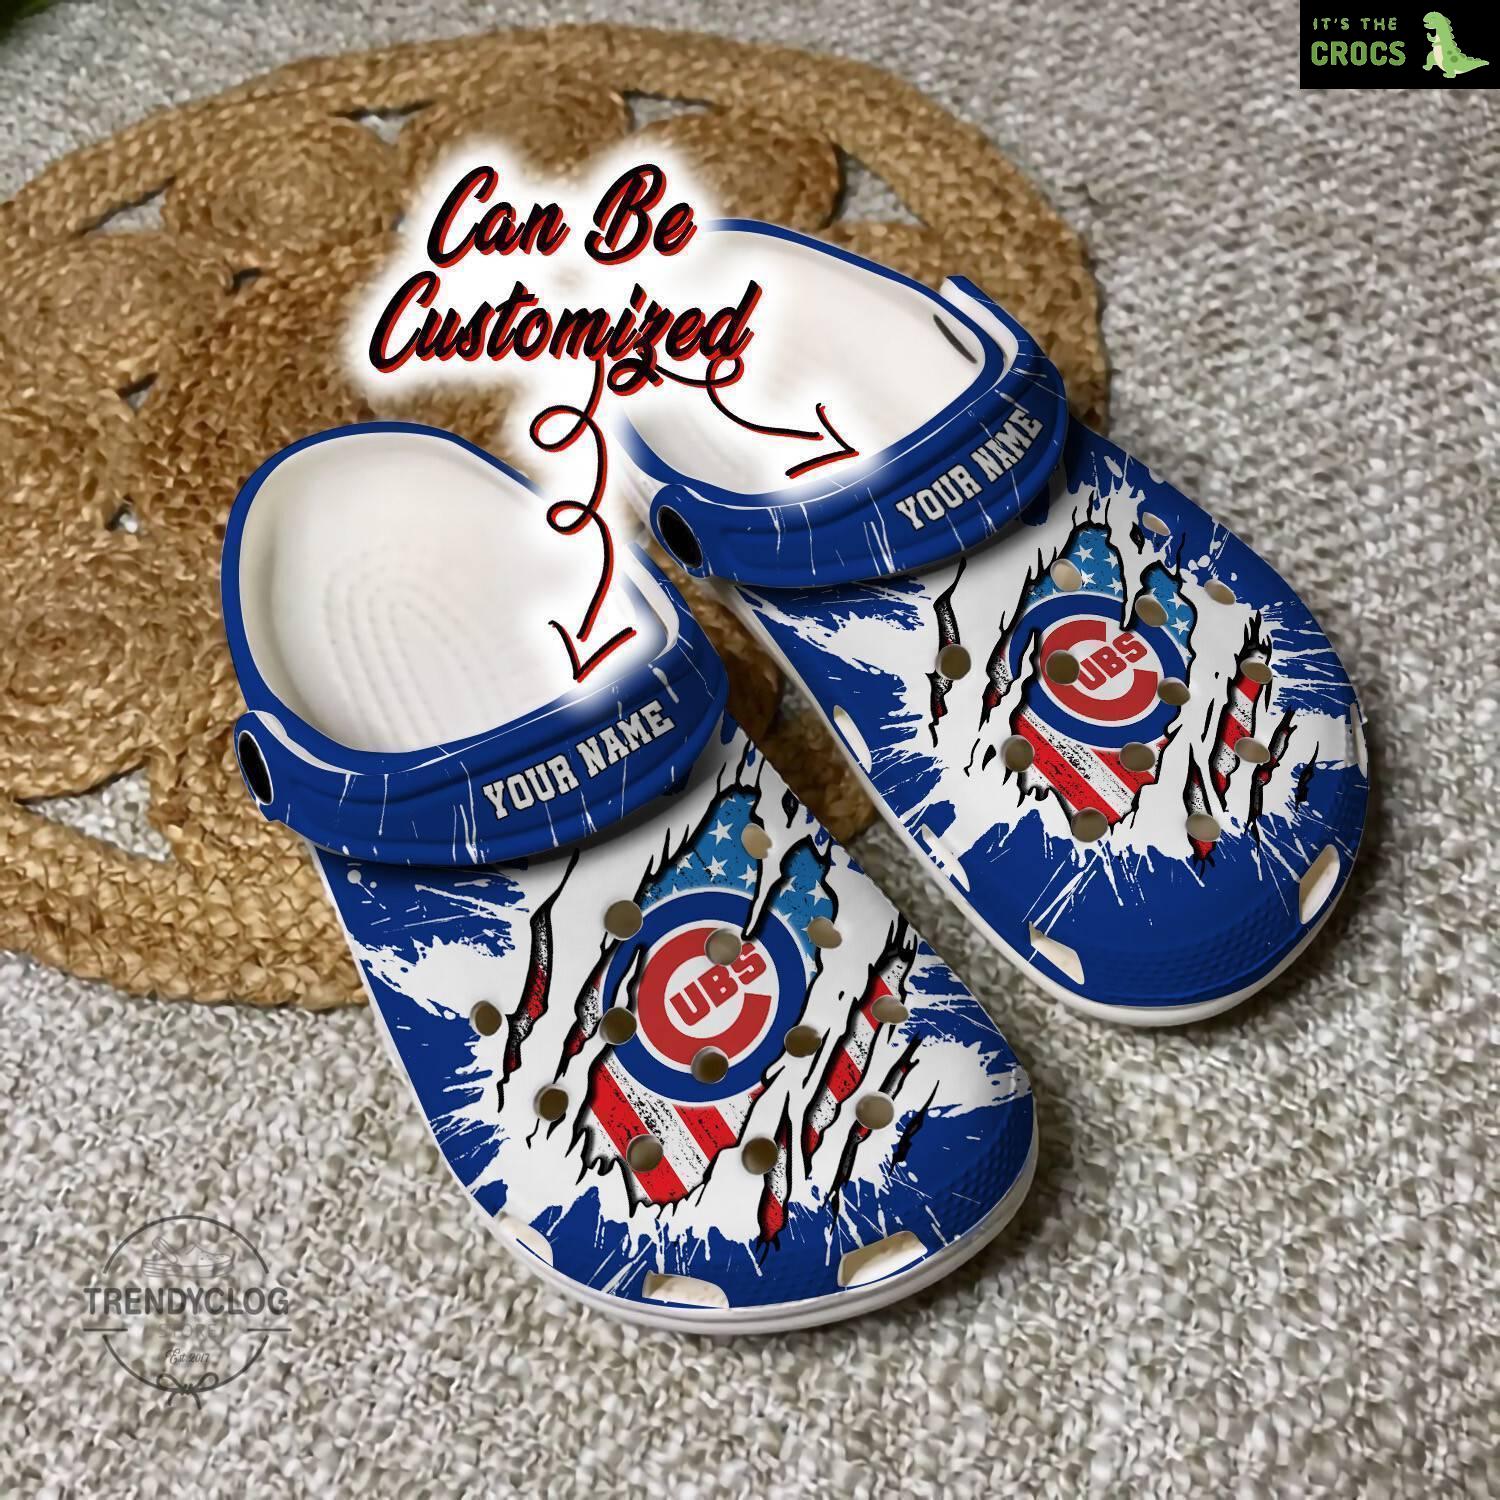 Cubs Crocs Personalized CCubs Baseball Ripped American Flag Clog Shoes